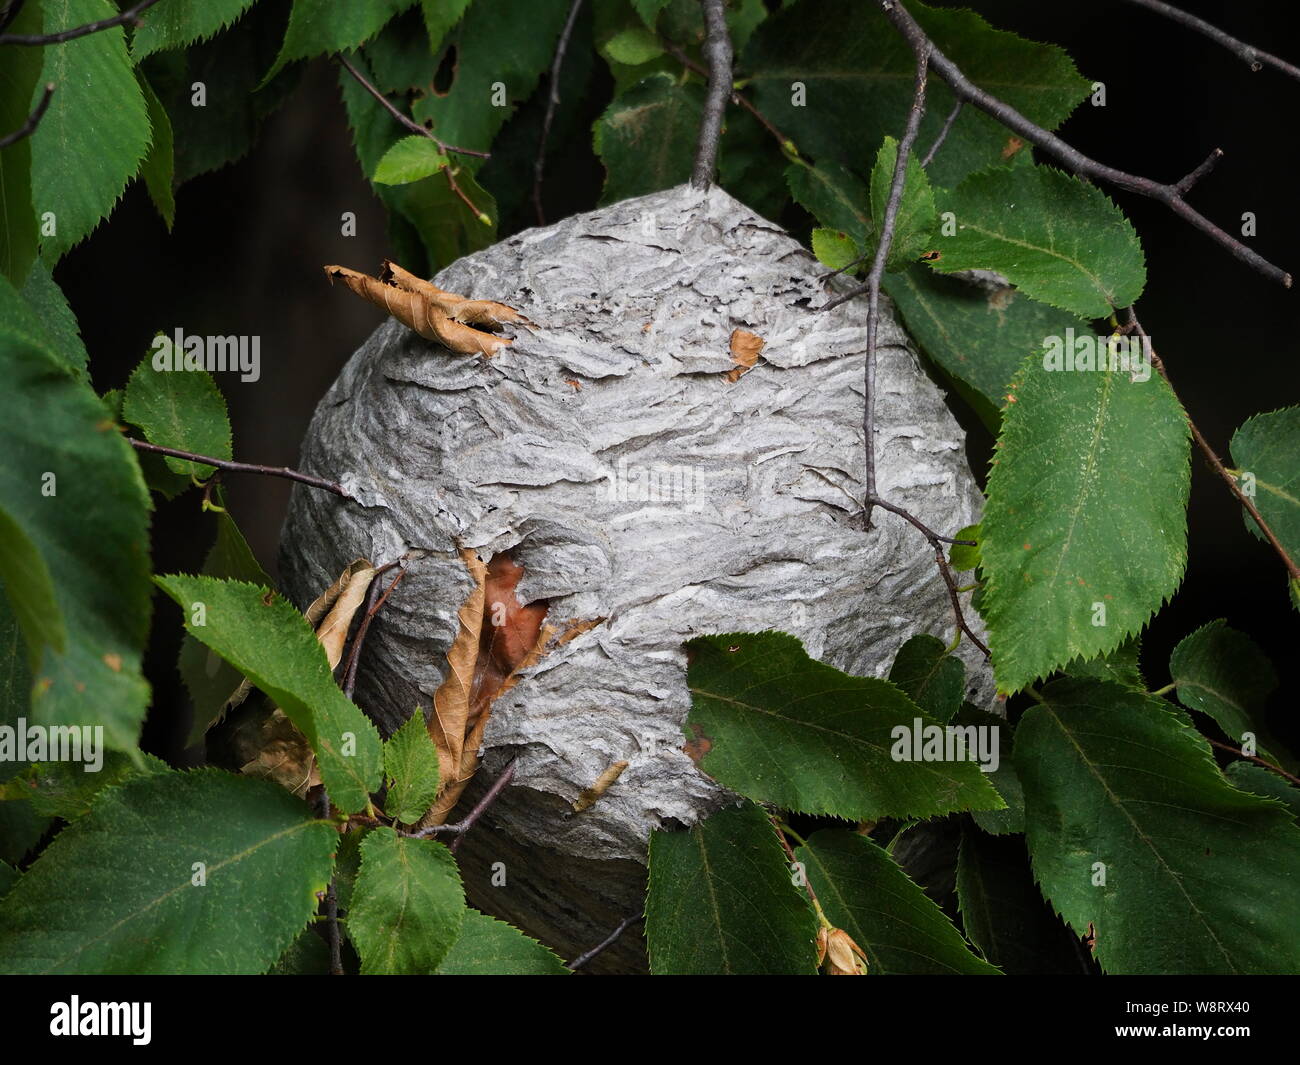 Close-up of a large nest of wasps hanging from a tree branch Stock Photo